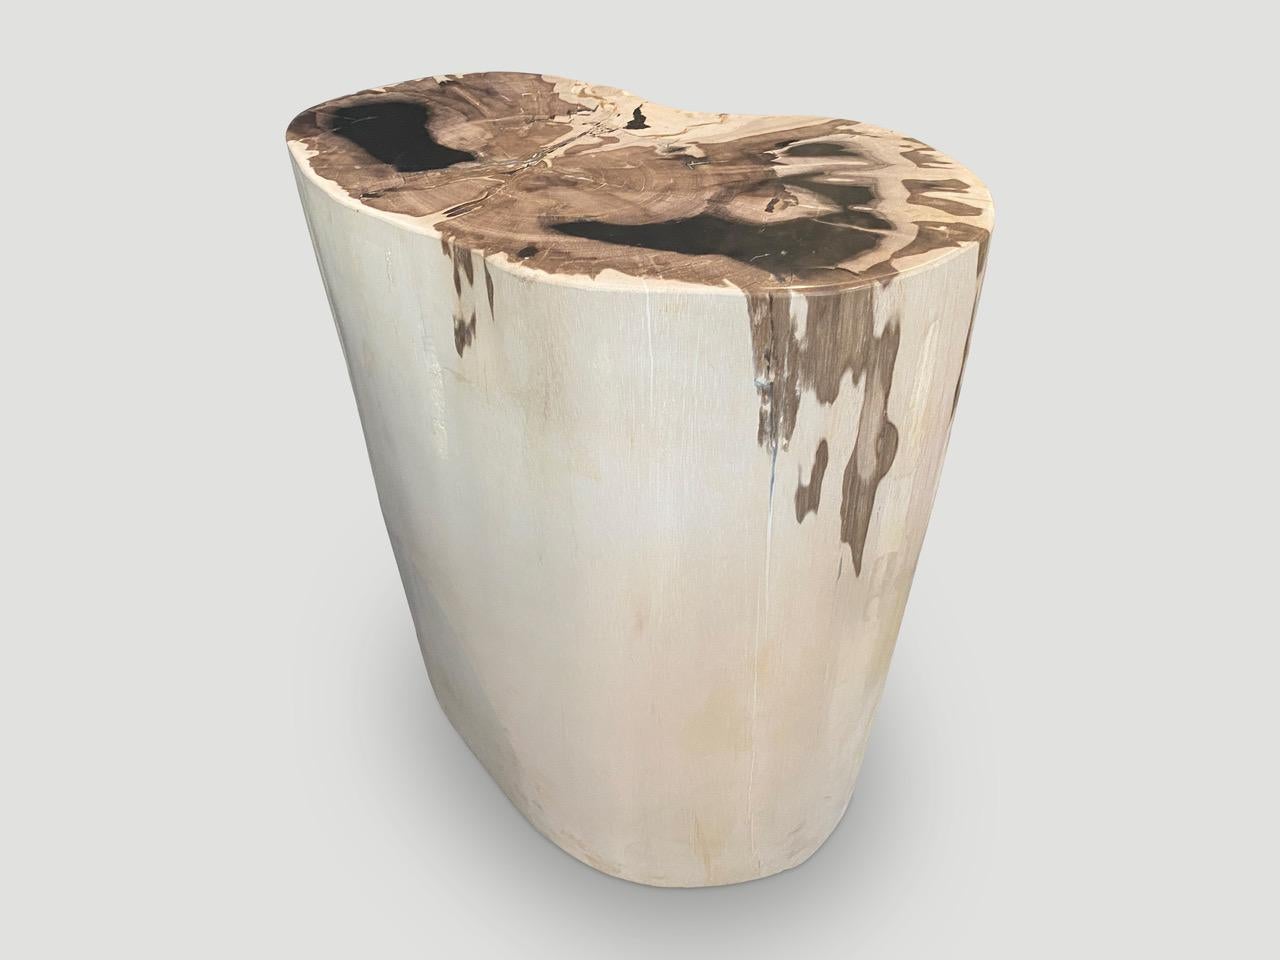 Beautiful impressive contrasting markings on this very rare, super smooth, high quality petrified wood side table. Exquisite. It’s fascinating how Mother Nature produces these stunning 40 million year old petrified teak logs with such contrasting